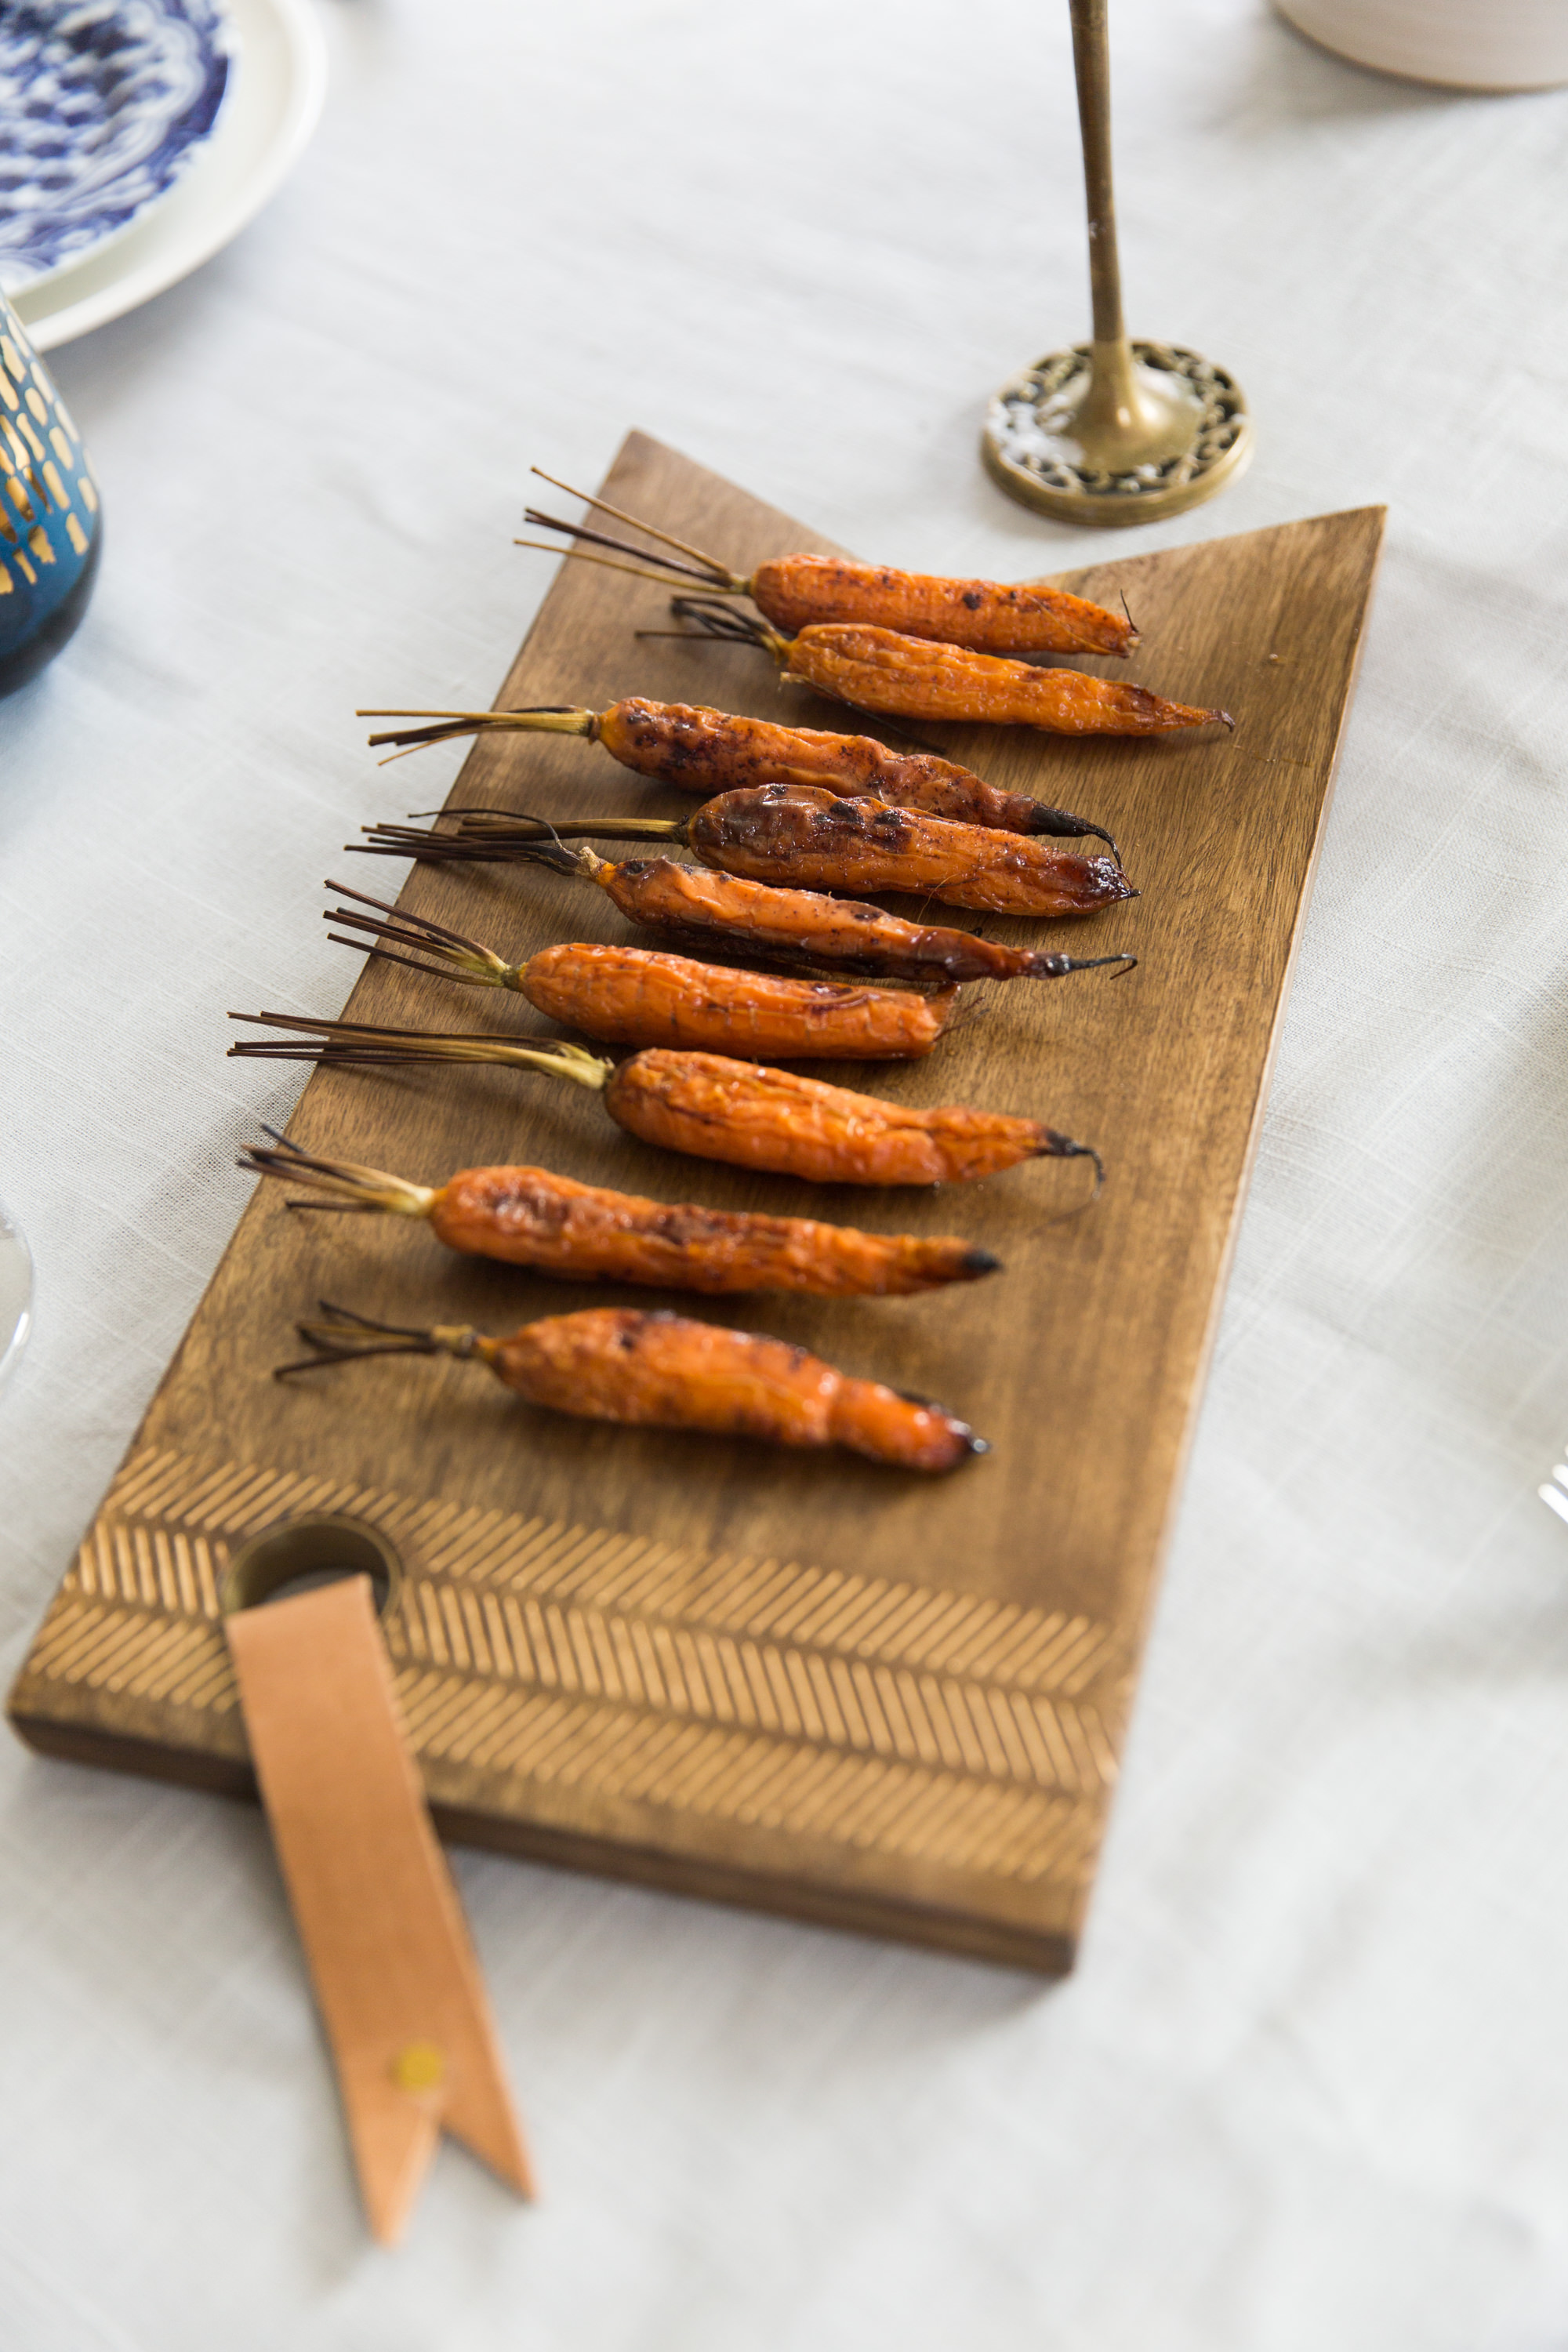 Plated Roasted Carrots